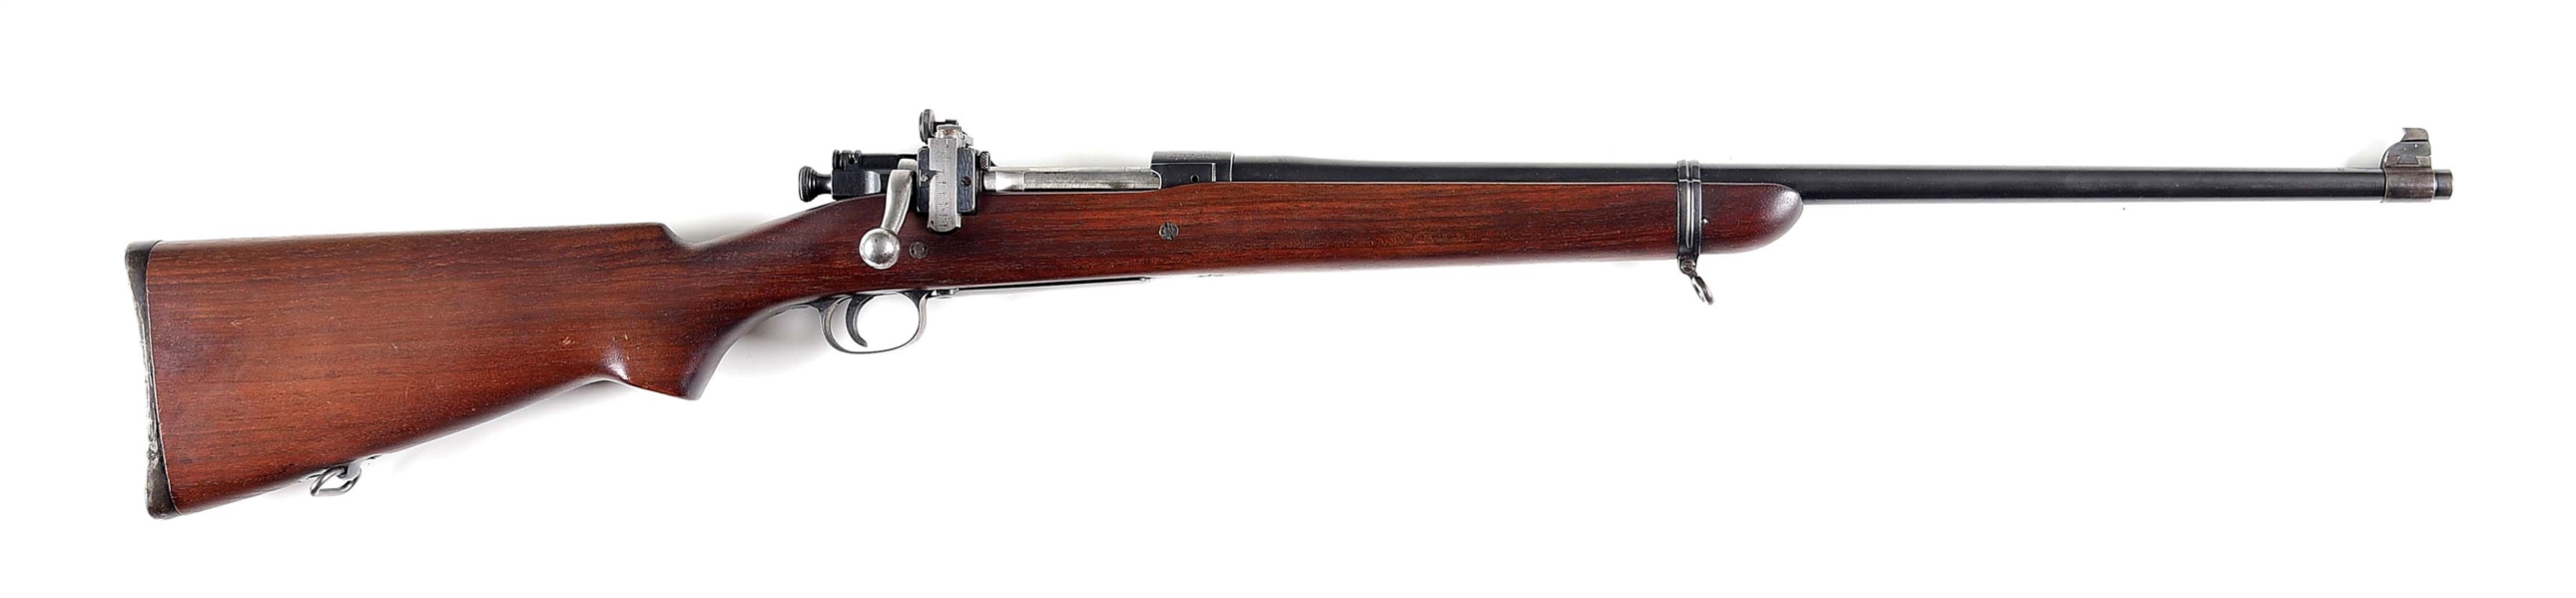 (C) SPRINGFIELD MODEL 1903 NRA STYLE SPORTER BOLT ACTION RIFLE.